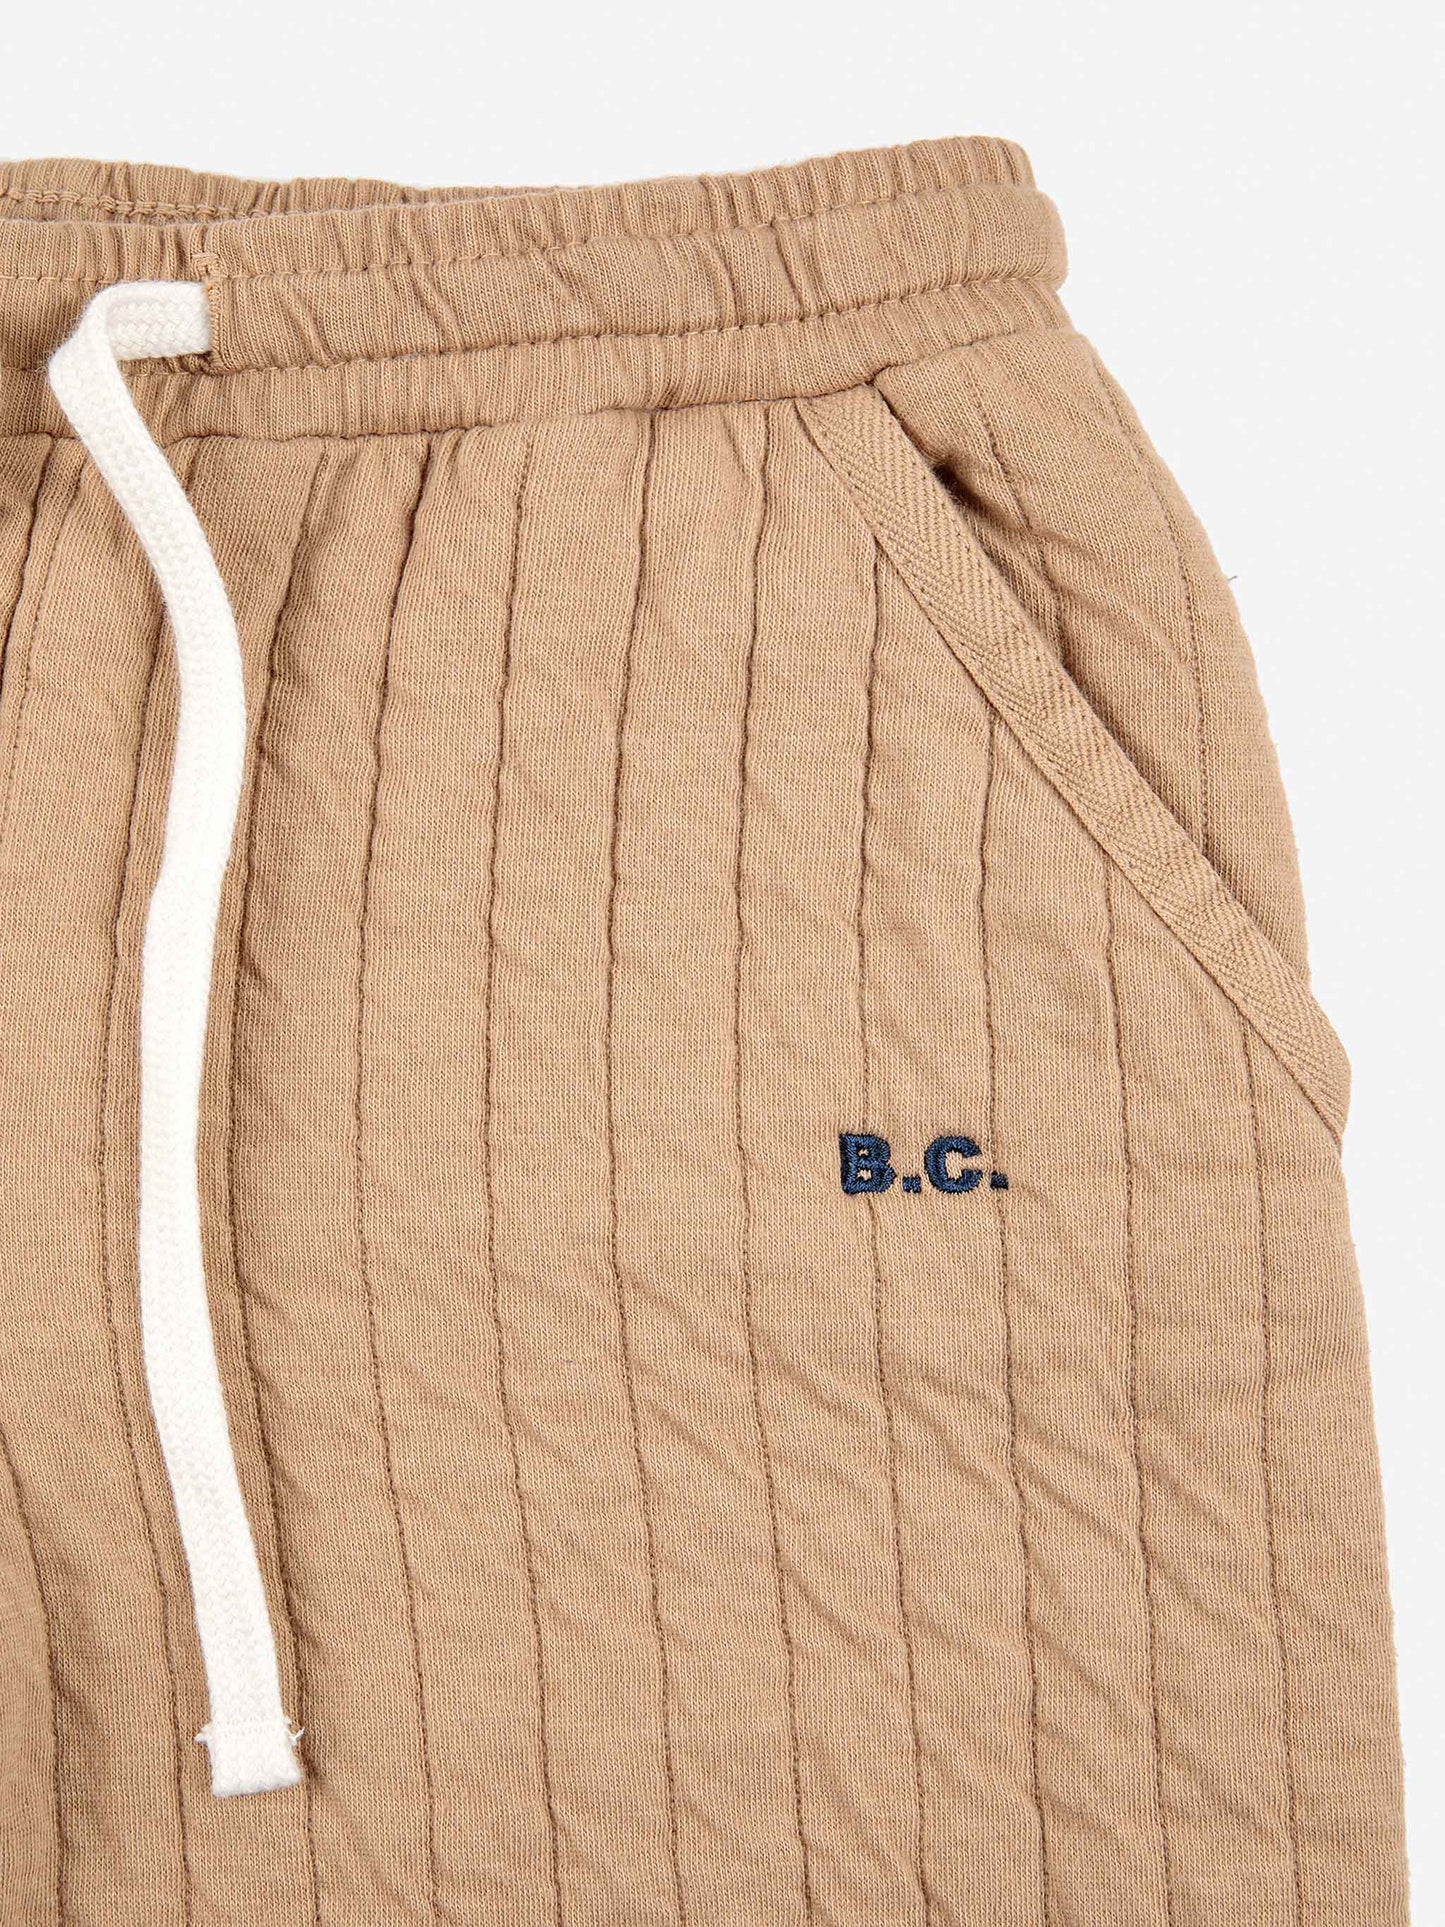 B.C quilted jogging pants